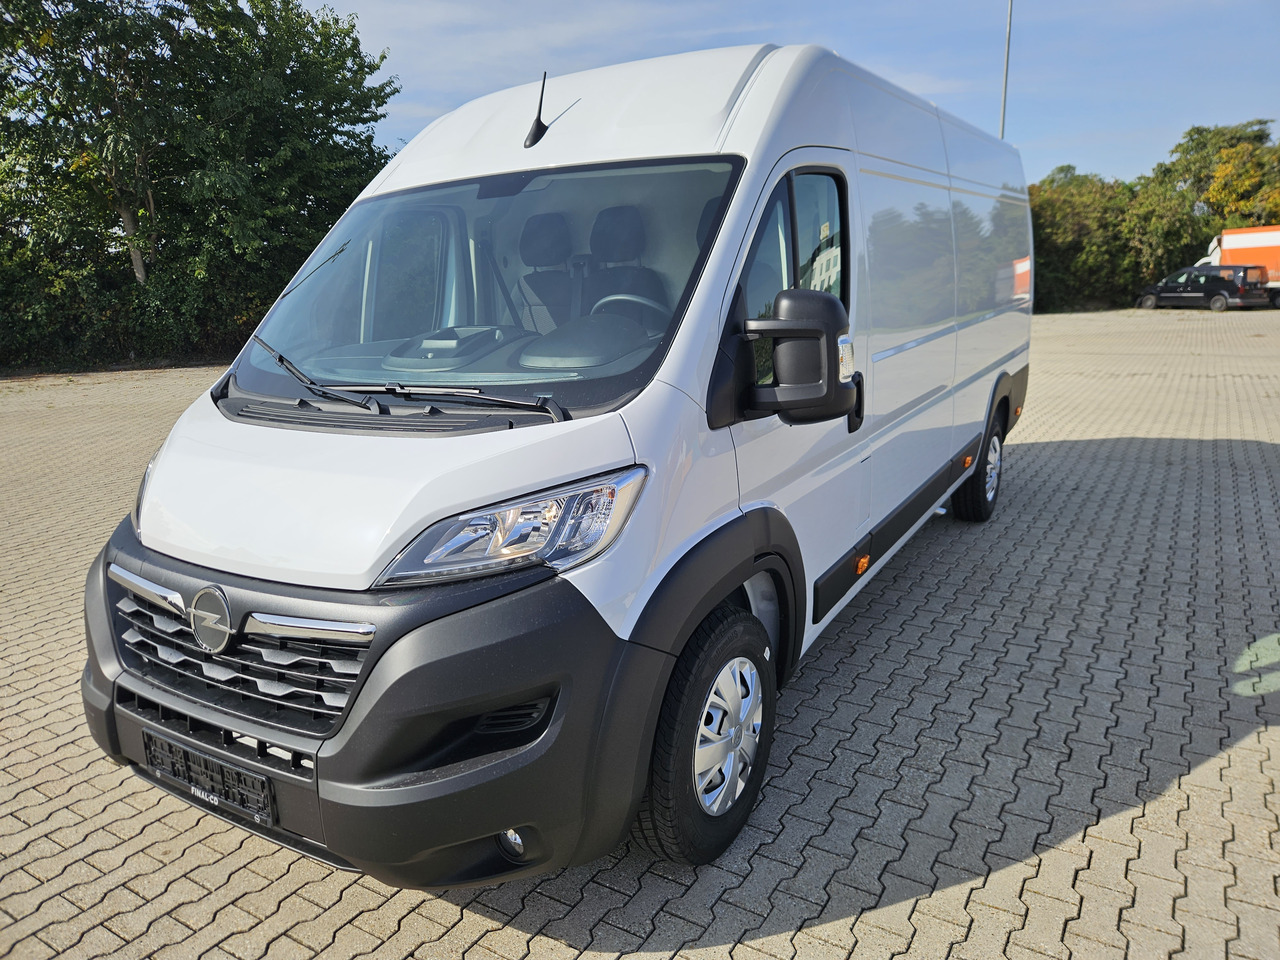 OPEL MOVANO L4H2 140PS - Panel van: picture 1